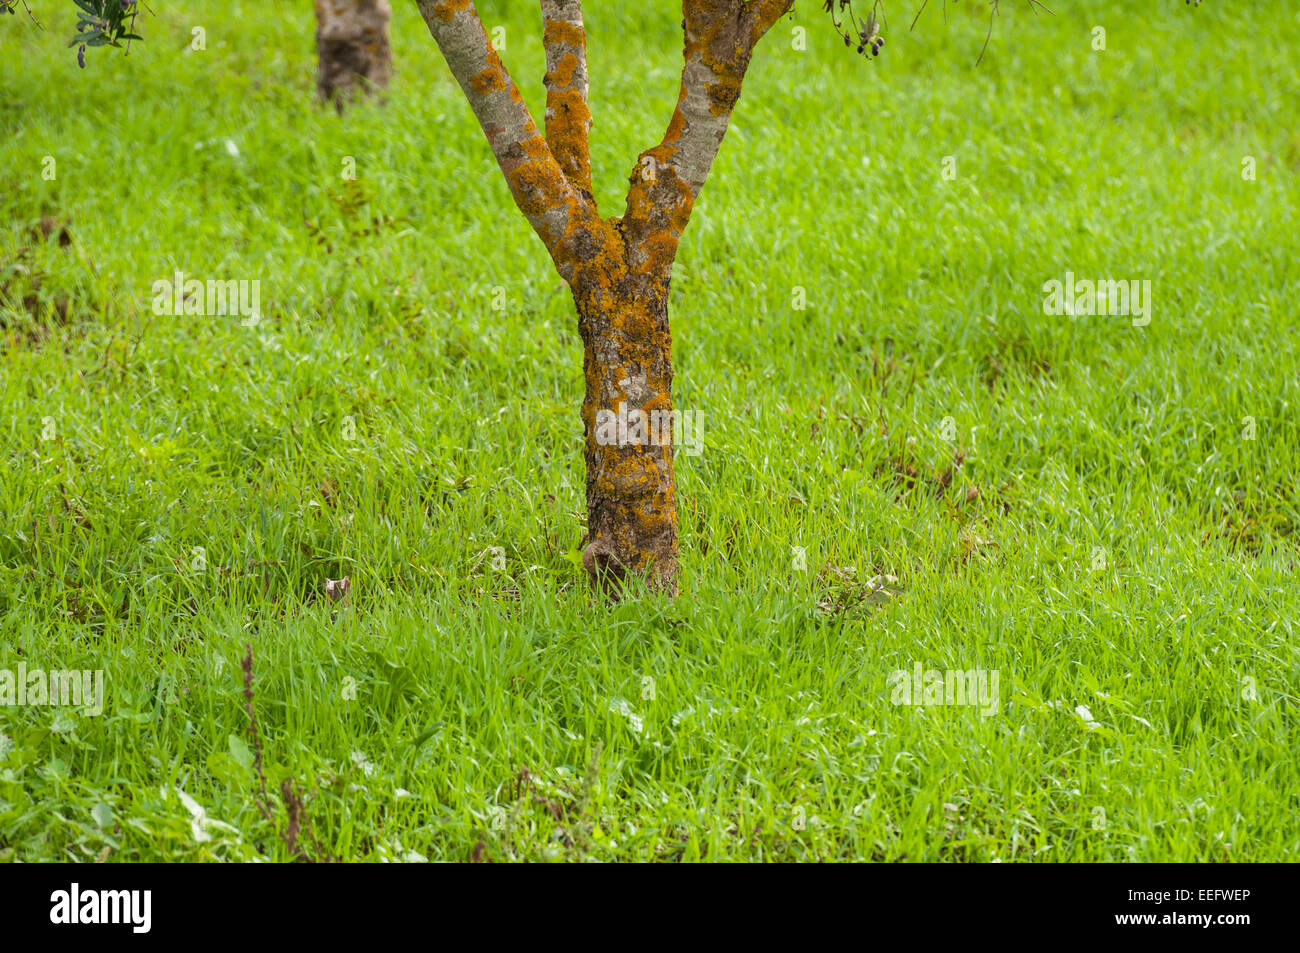 Spring growth in a meadow with pistachio trees Stock Photo